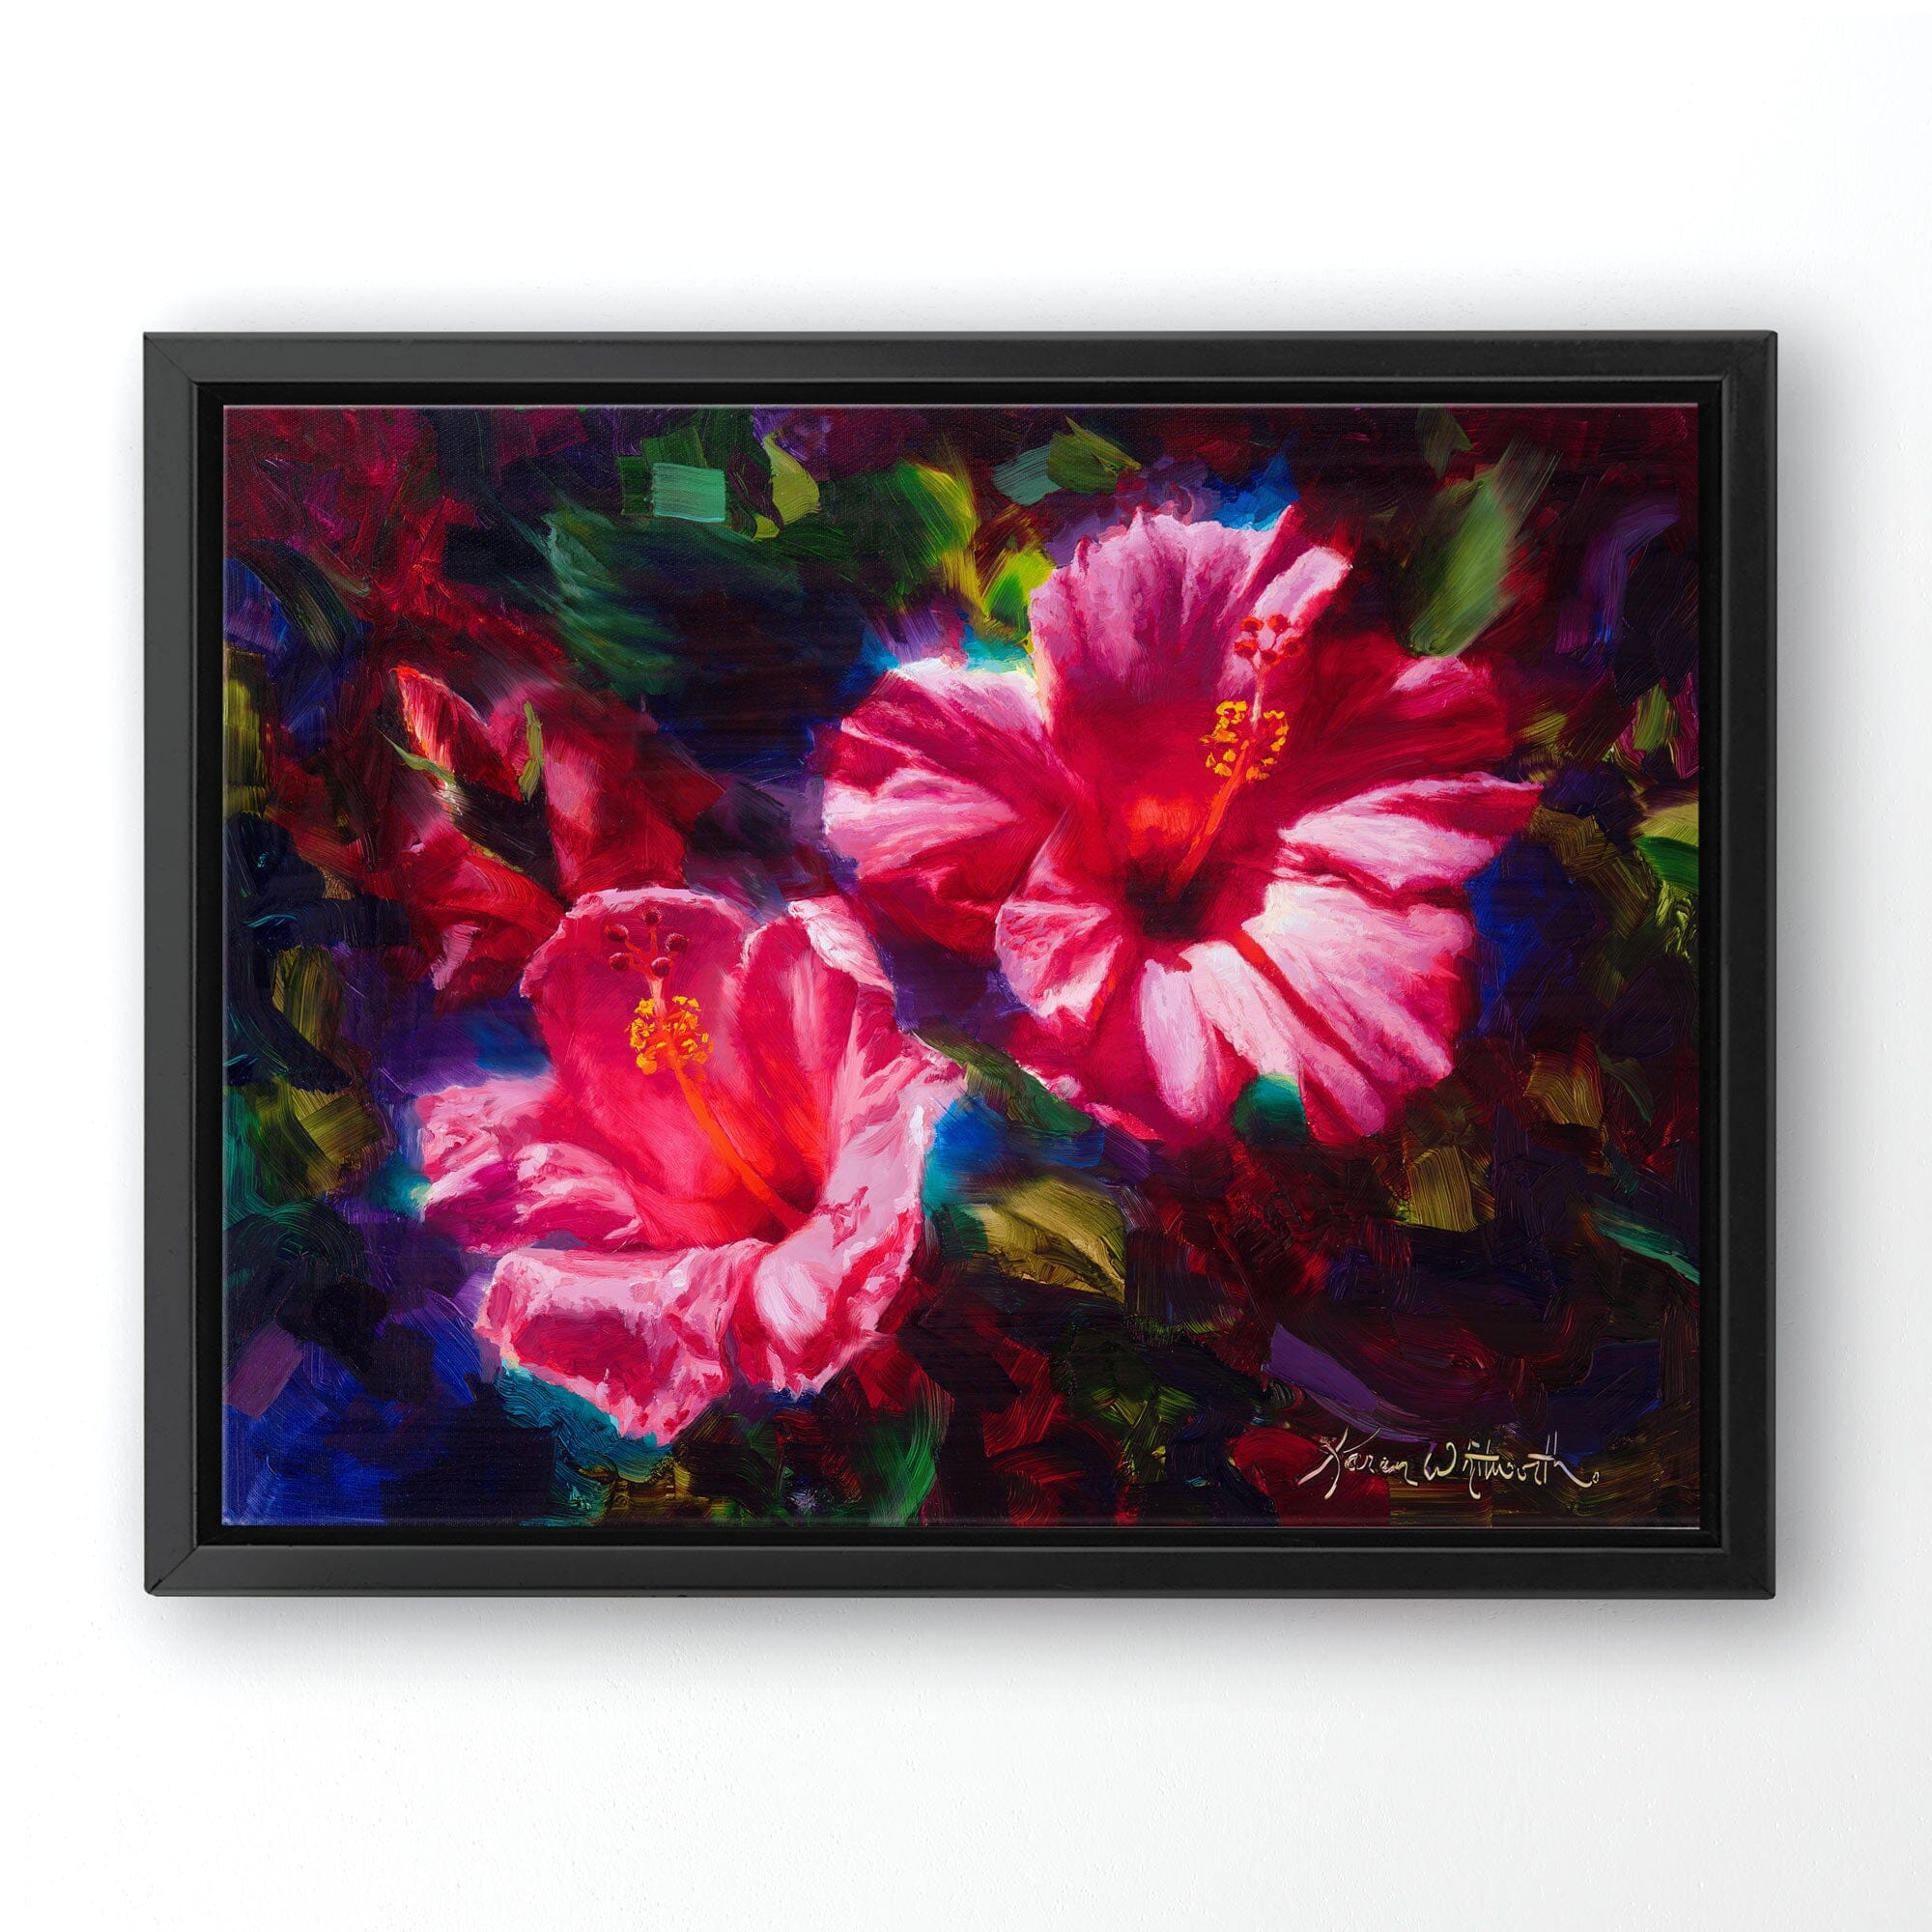 pink hibiscus Hawaiian flower painting on canvas by Hawaii artist Karen Whitworth. The artwork is framed in a black frame and hanging on a white wall.